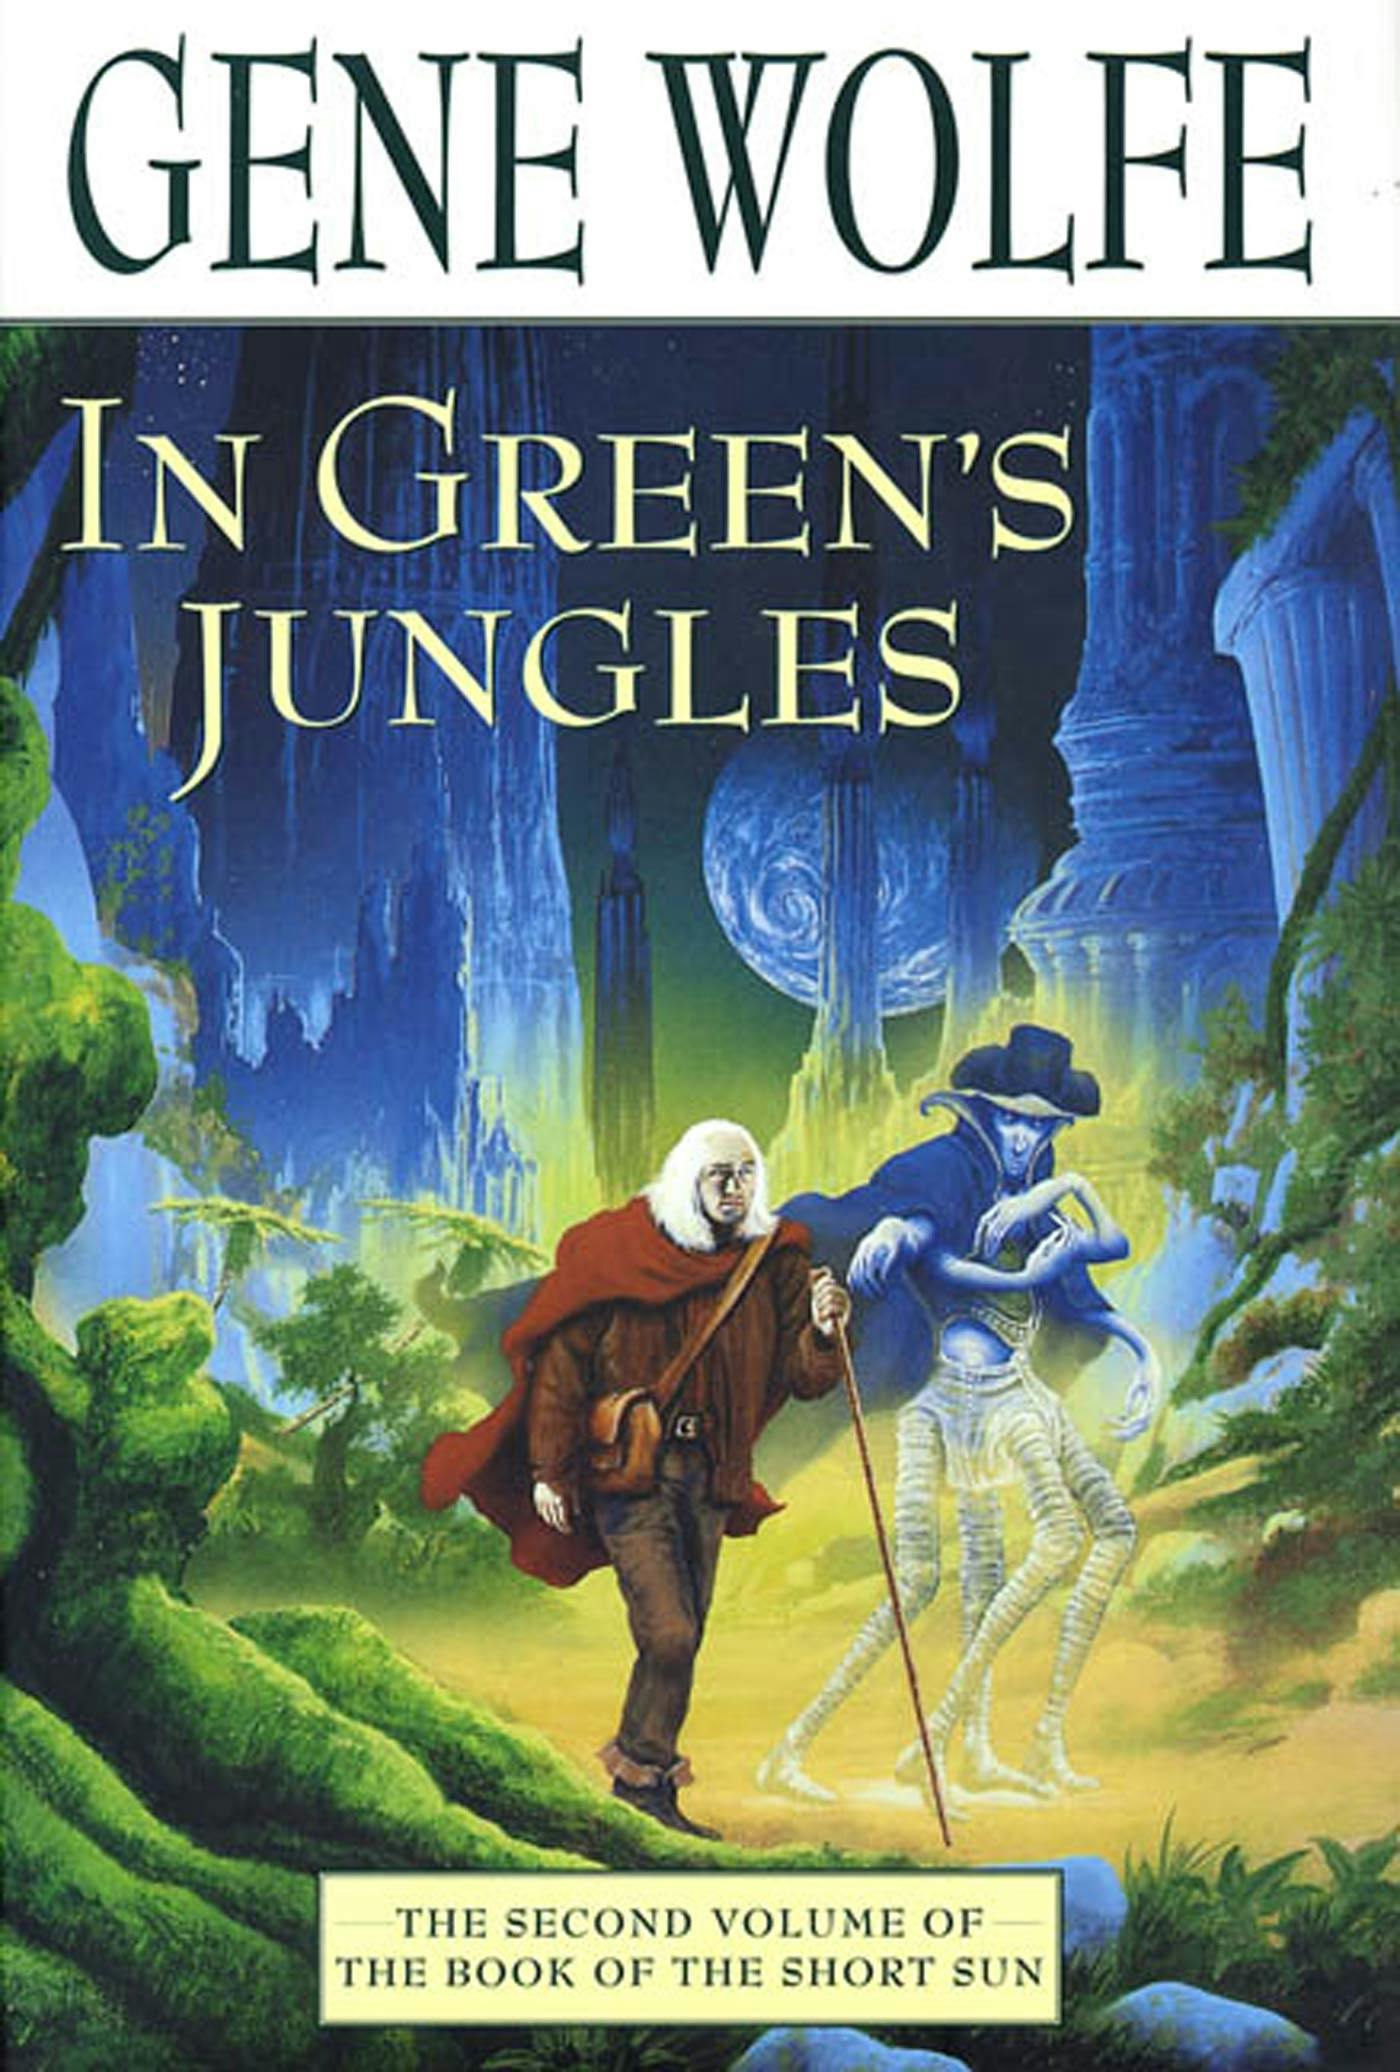 Cover for the book titled as: In Green's Jungles